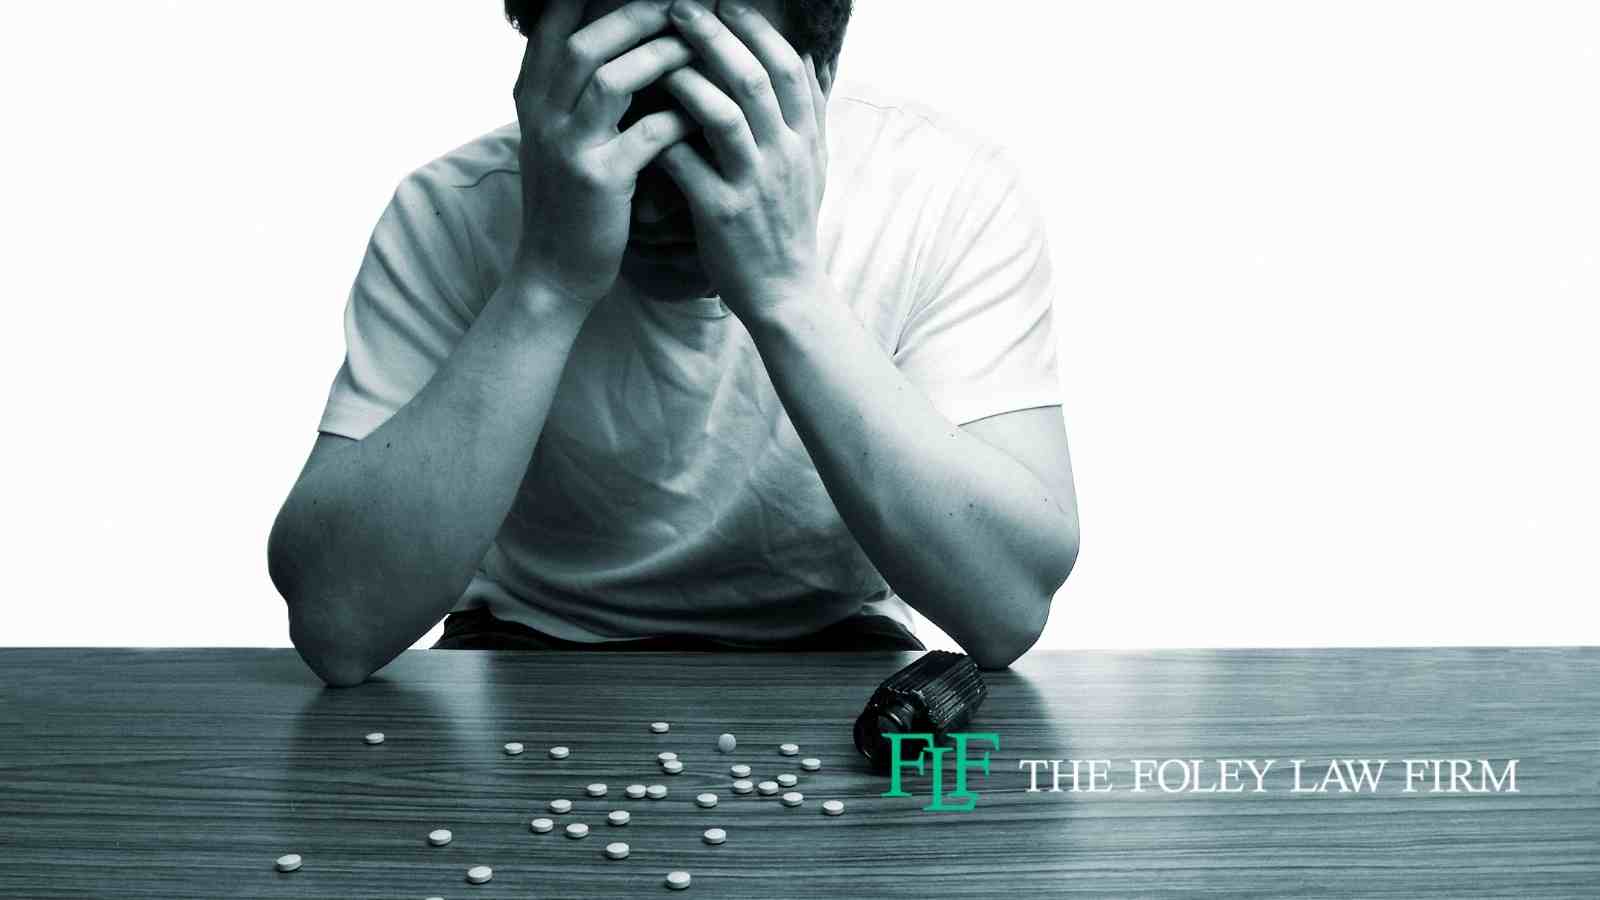 Addiction plays a major role in many drug charges